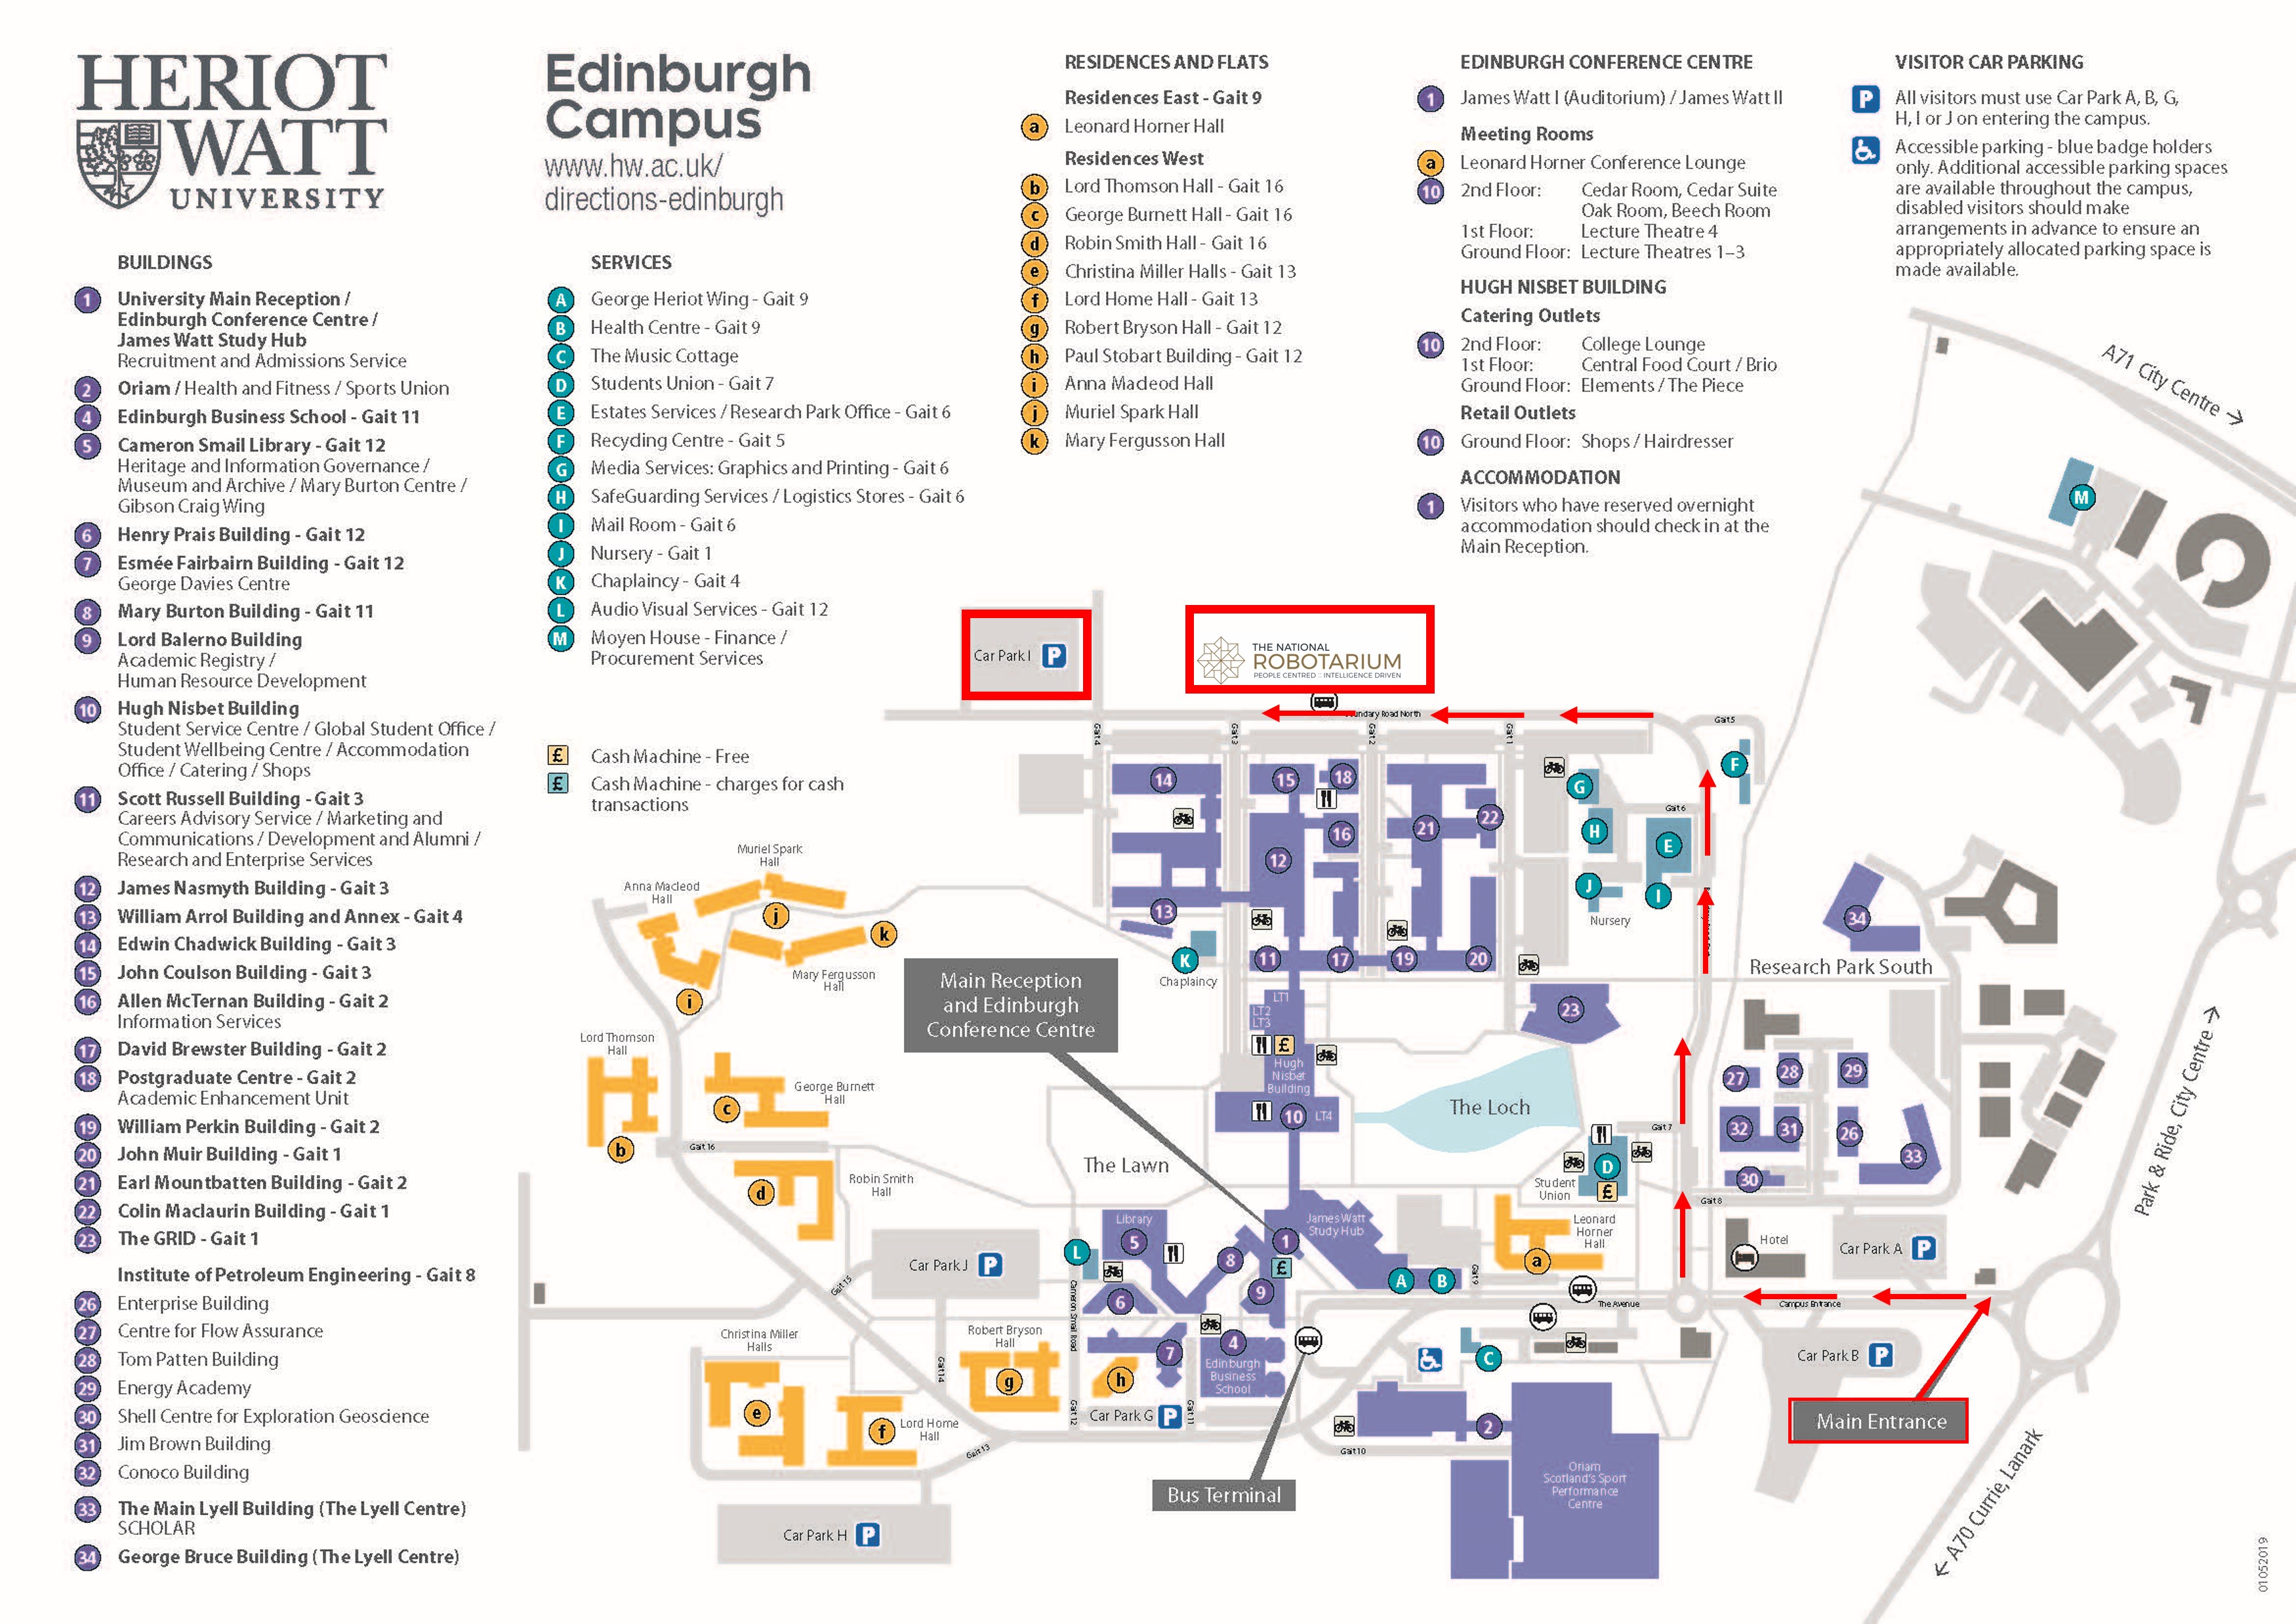 Annotated campus map with NR